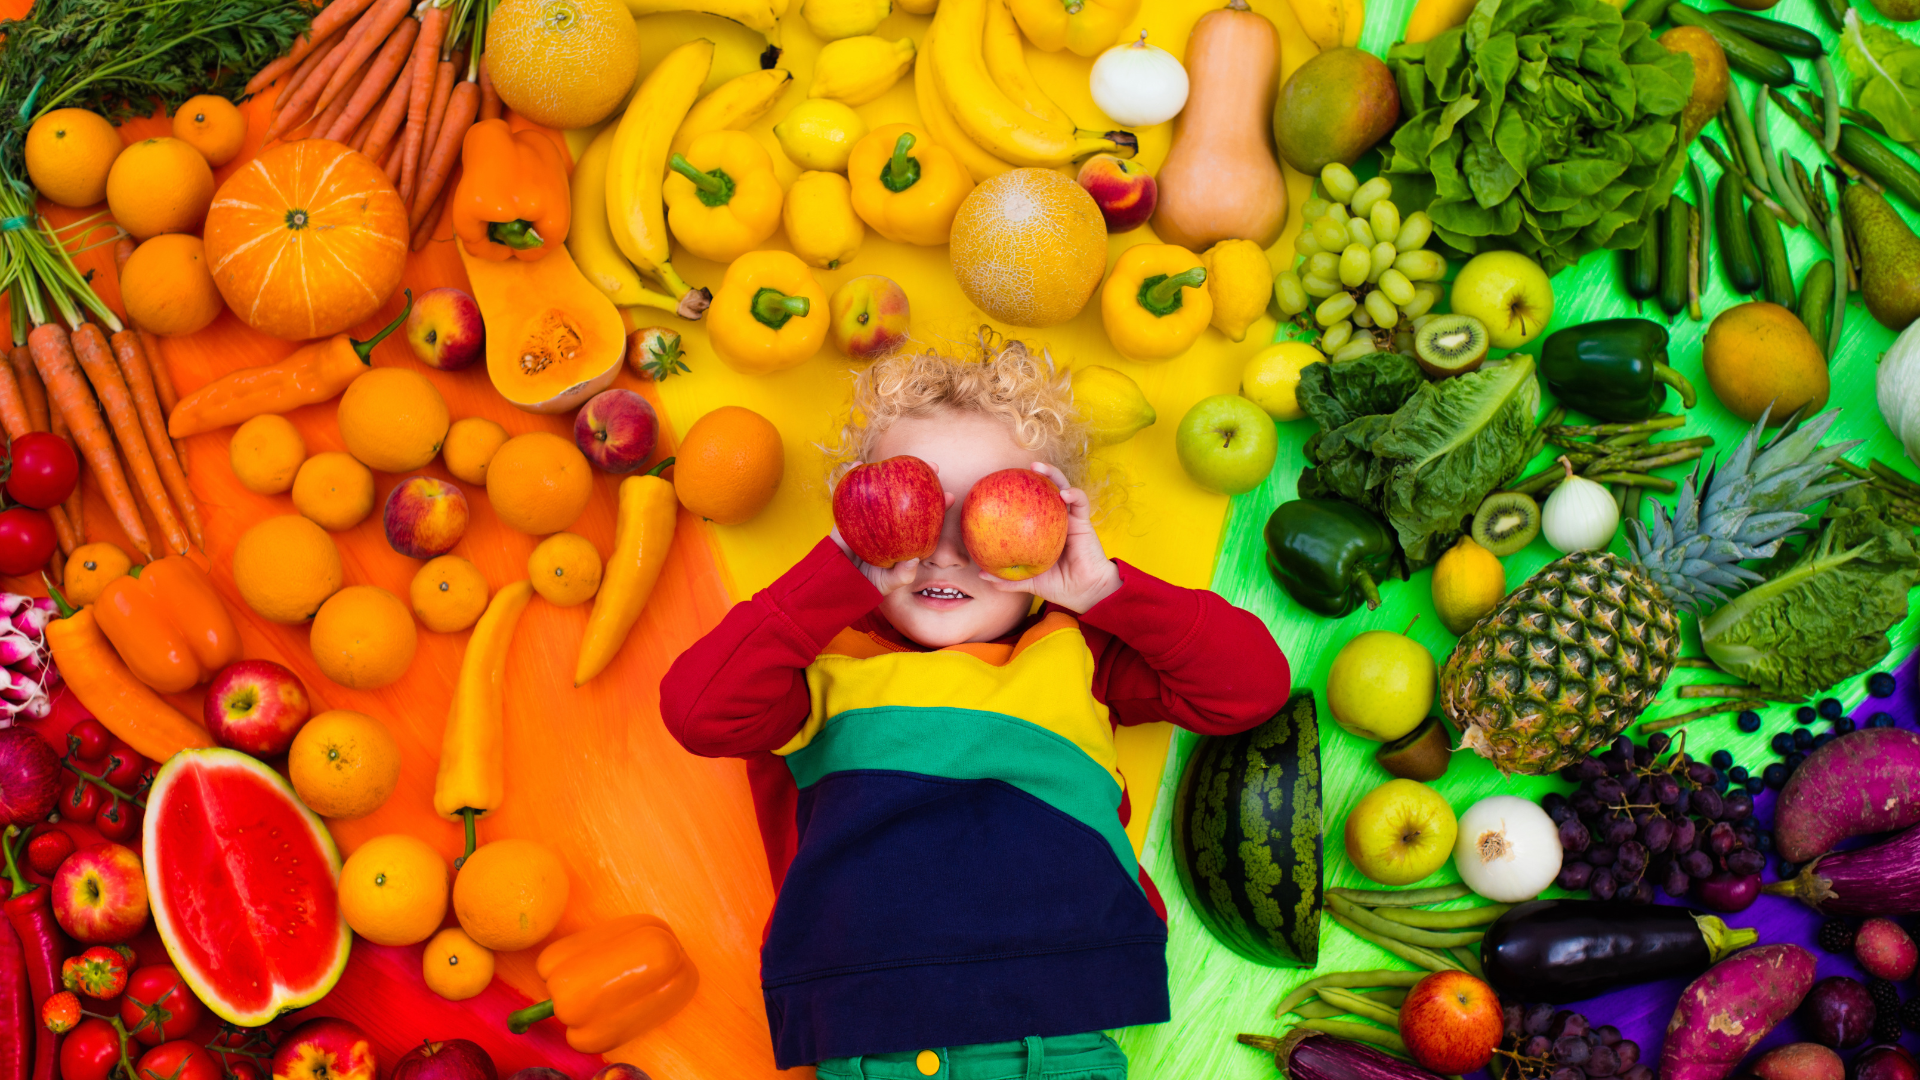 A child sits among an intricate display of produce, Fruits and vegetables are grouped by color, giving the effect of a rainbow. The small child is holding apples up to his face pretending they are his eyes.